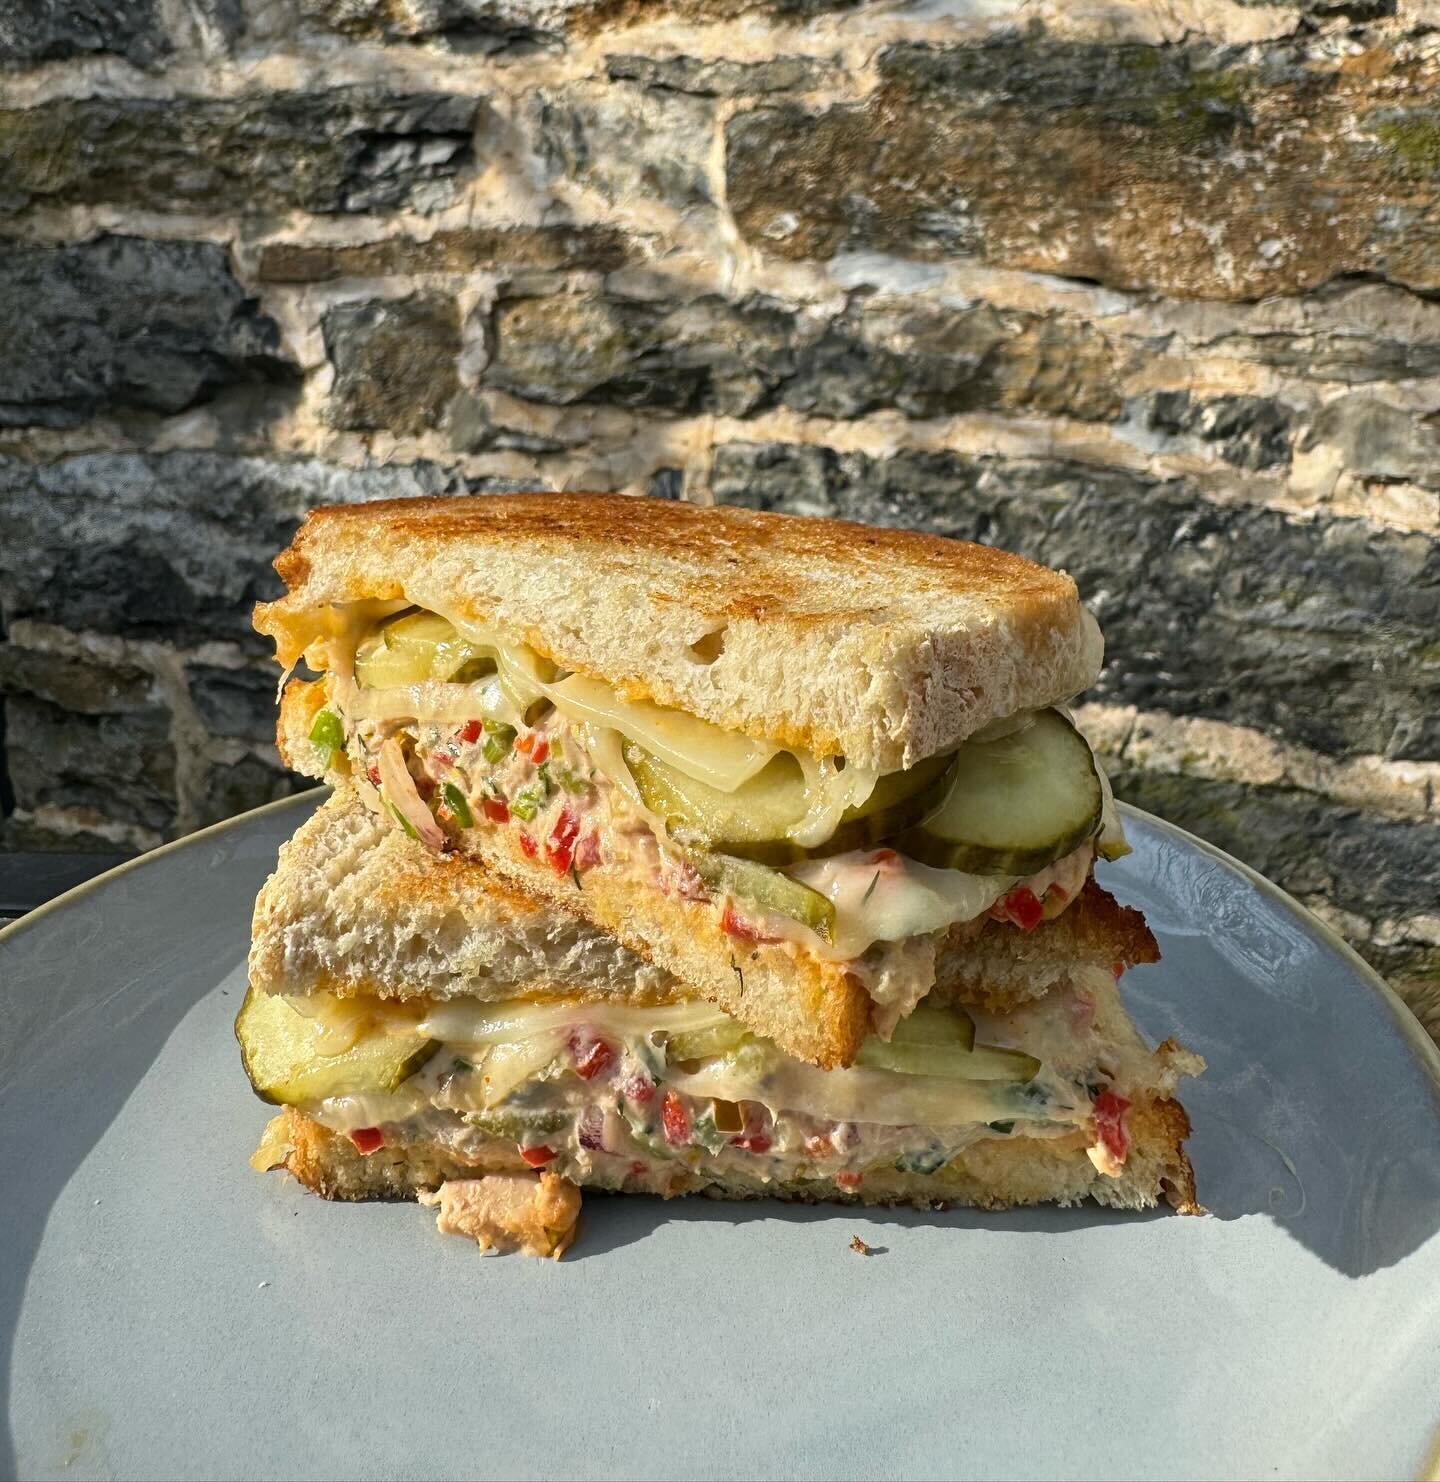 Tuna melt on the menu today! 

Our festive tuna salad with melted Swiss, spicy pickles, and sriracha mayo on your choice of multigrain or sourdough bread! 

Available today and tomorrow from 10am-3pm.